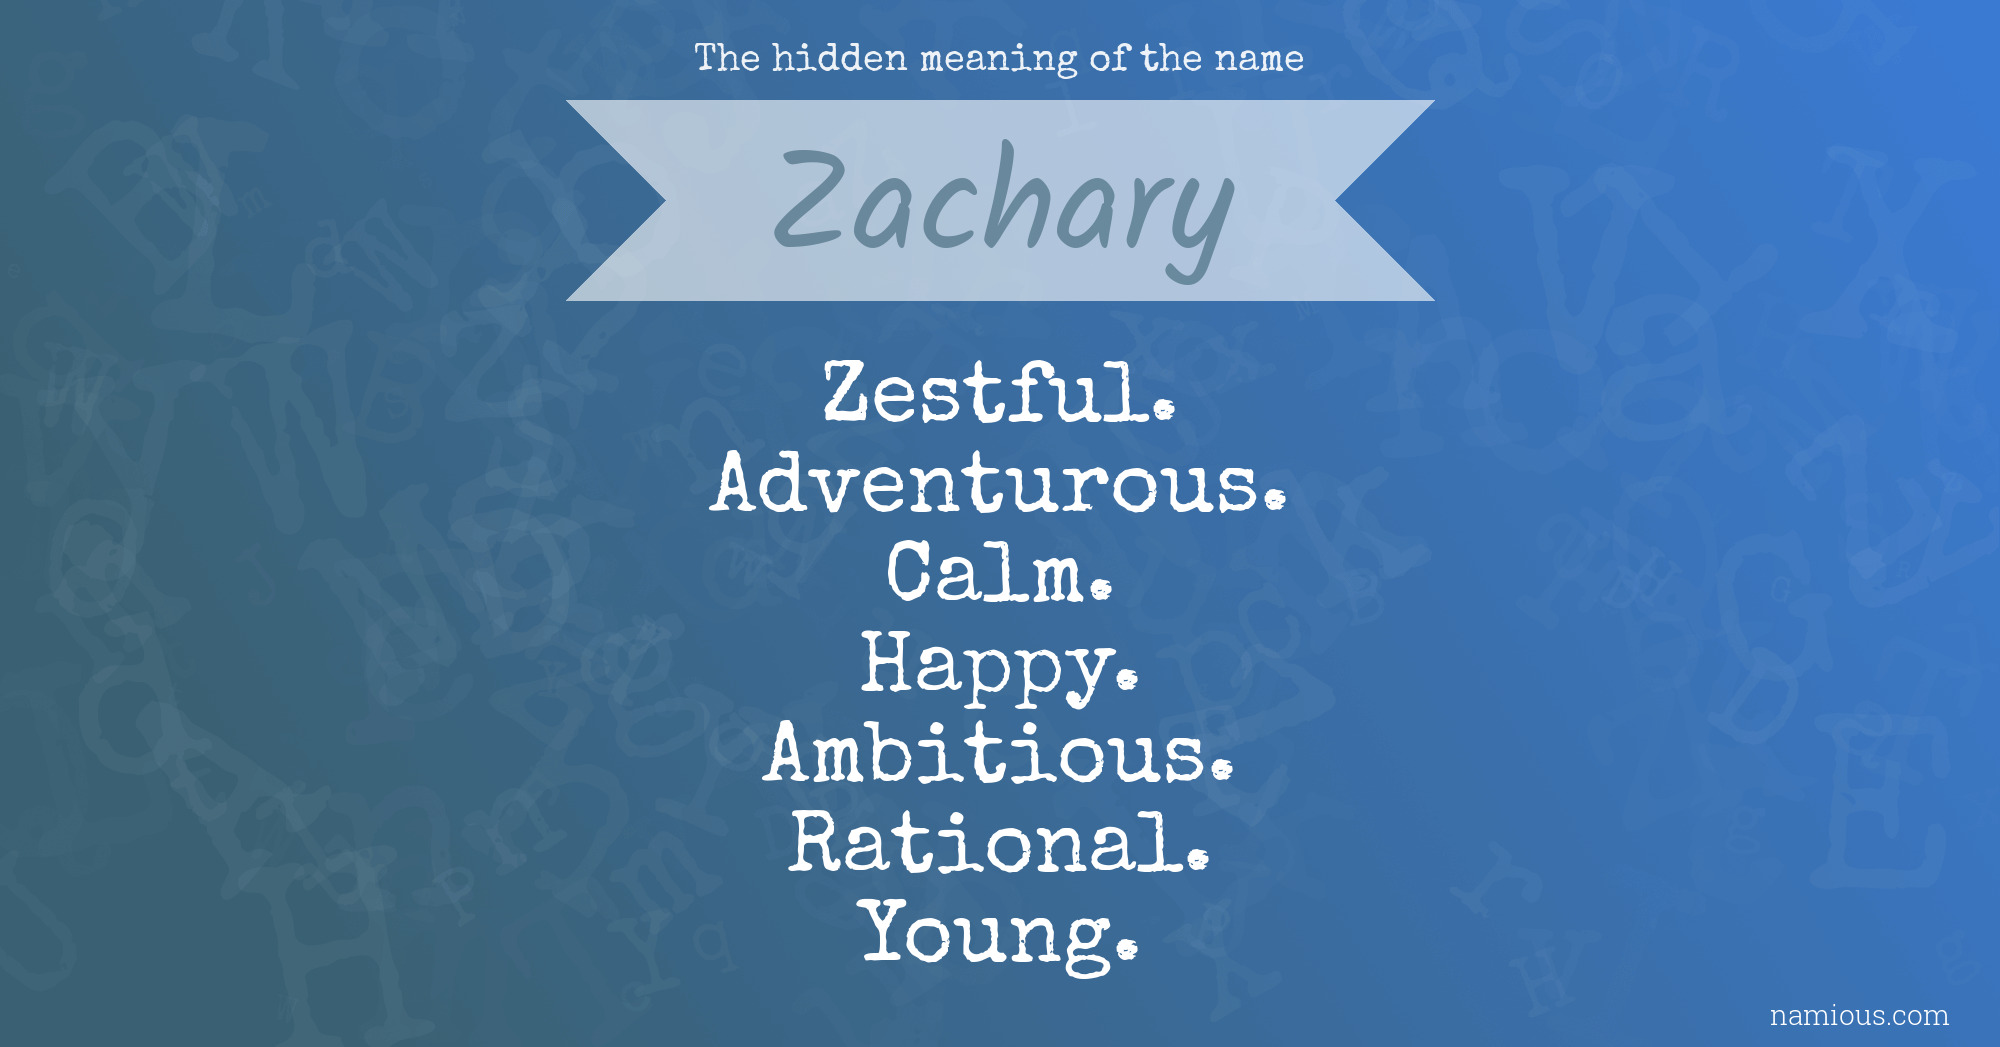 The hidden meaning of the name Zachary